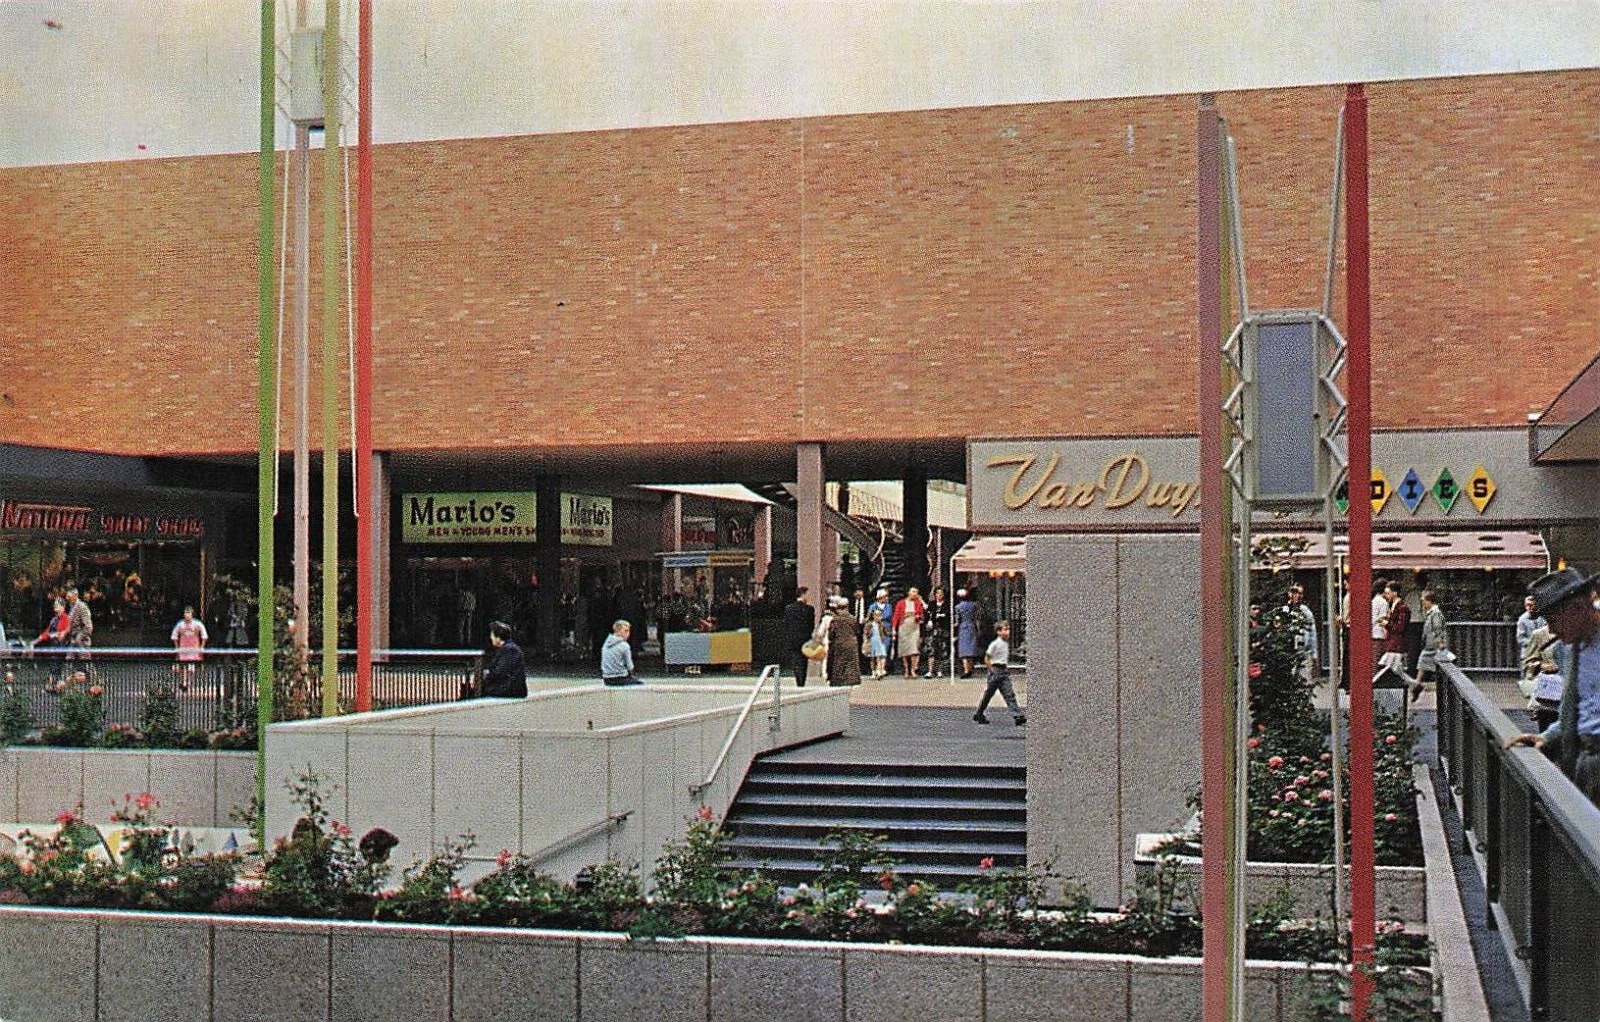 The Lloyd Center Portland Oregon - view looking into the center of Mall c1960s